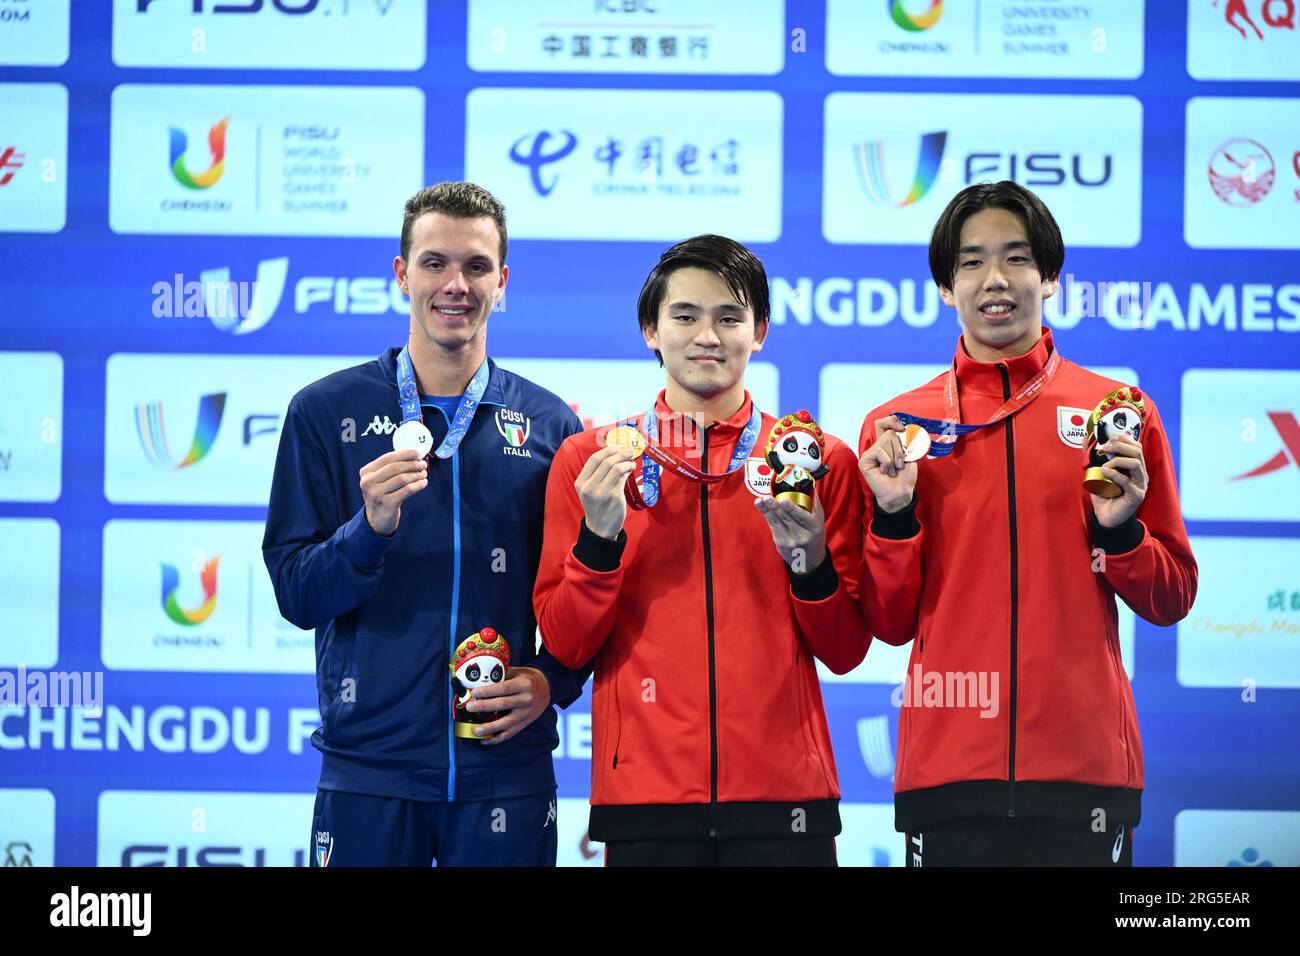 Chengdu, China's Sichuan Province. 7th Aug, 2023. Tabuchi Kaito (C) of Japan, Pier Andrea Matteazzi (L) of Italy and Kamikawabata Ei of Japan pose on the podium during the medal ceremony of the men's 400m individual medley final of swimming at the 31st FISU Summer World University Games in Chengdu, southwest China's Sichuan Province, Aug. 7, 2023. Credit: Wu Gang/Xinhua/Alamy Live News Stock Photo